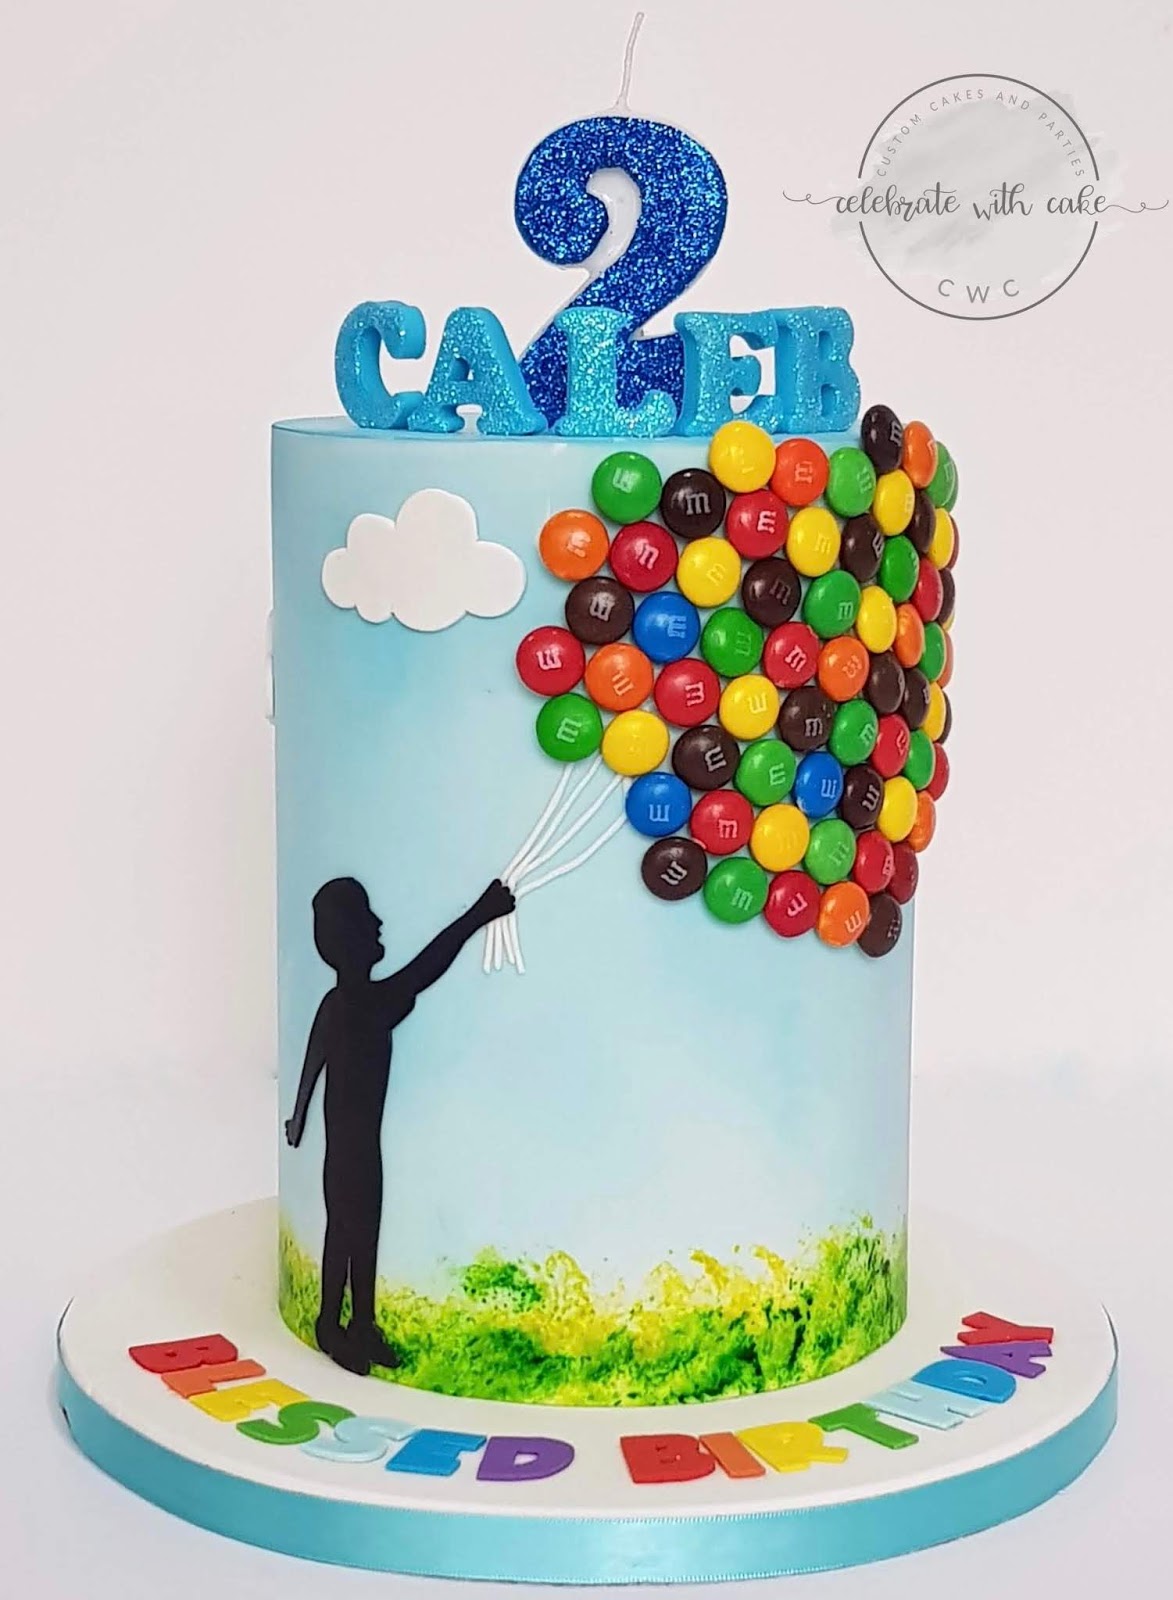 Celebrate with Cake!: Boy with Balloons Cake